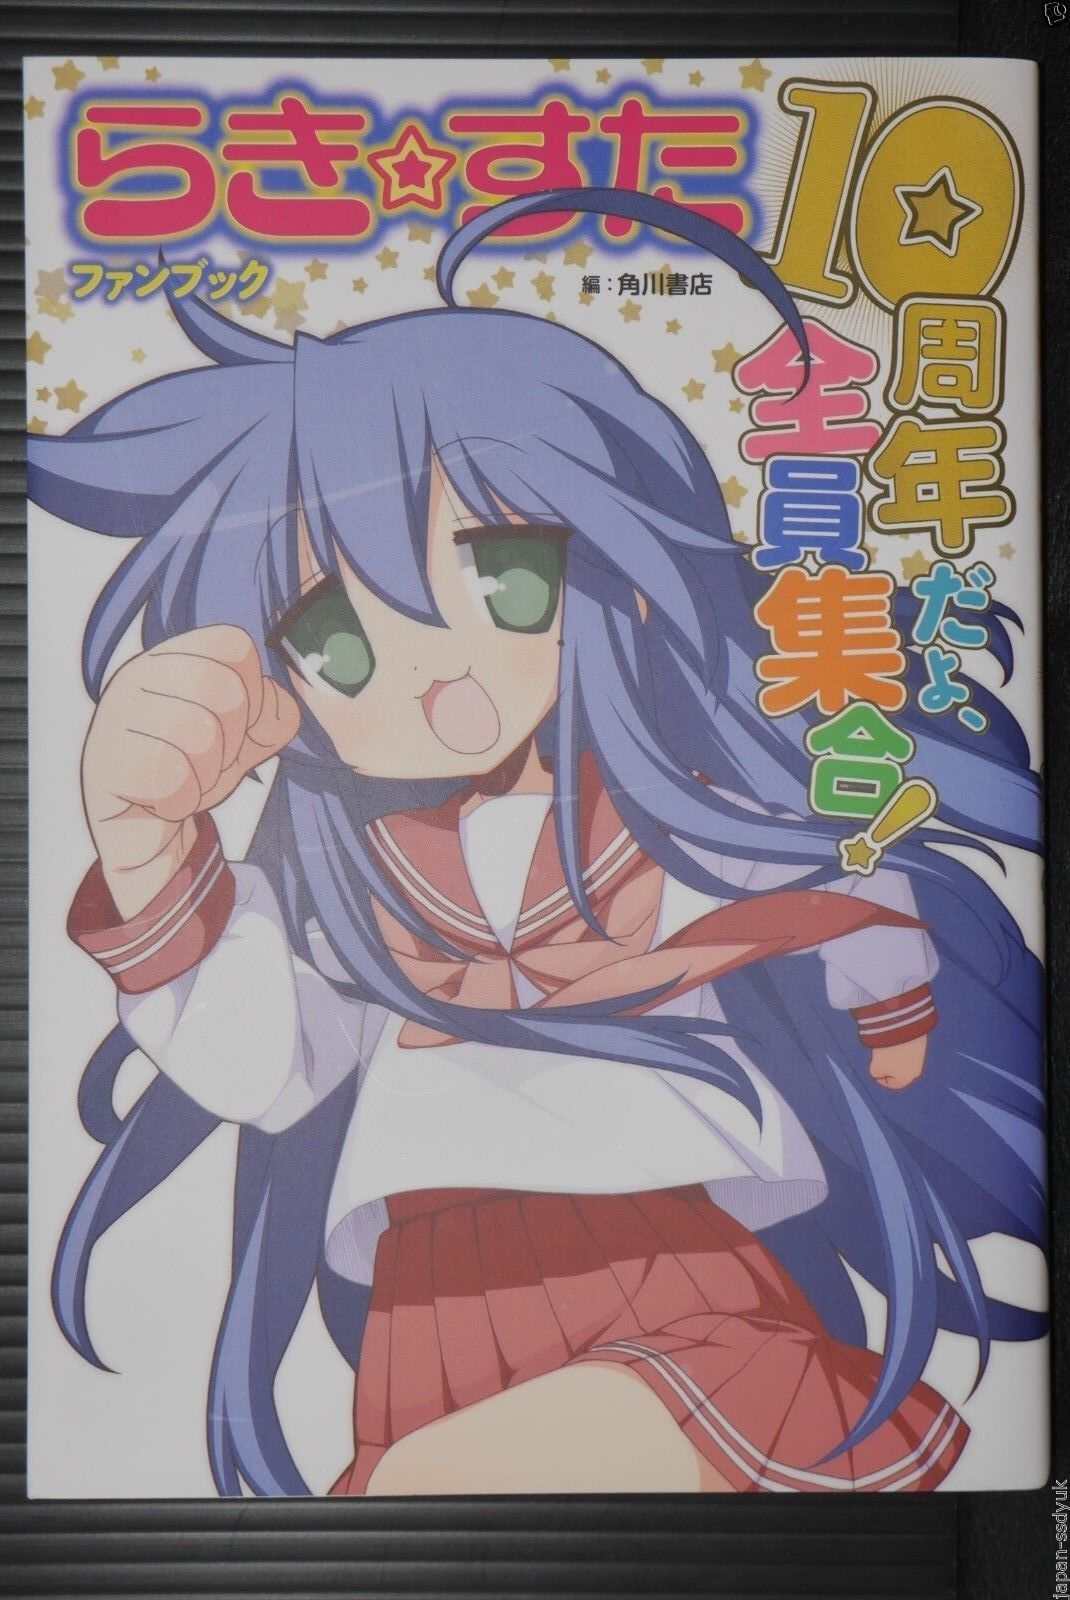 Lucky Star 10th Anniversary Fan Book -by Kagami Yoshimizu from JAPAN